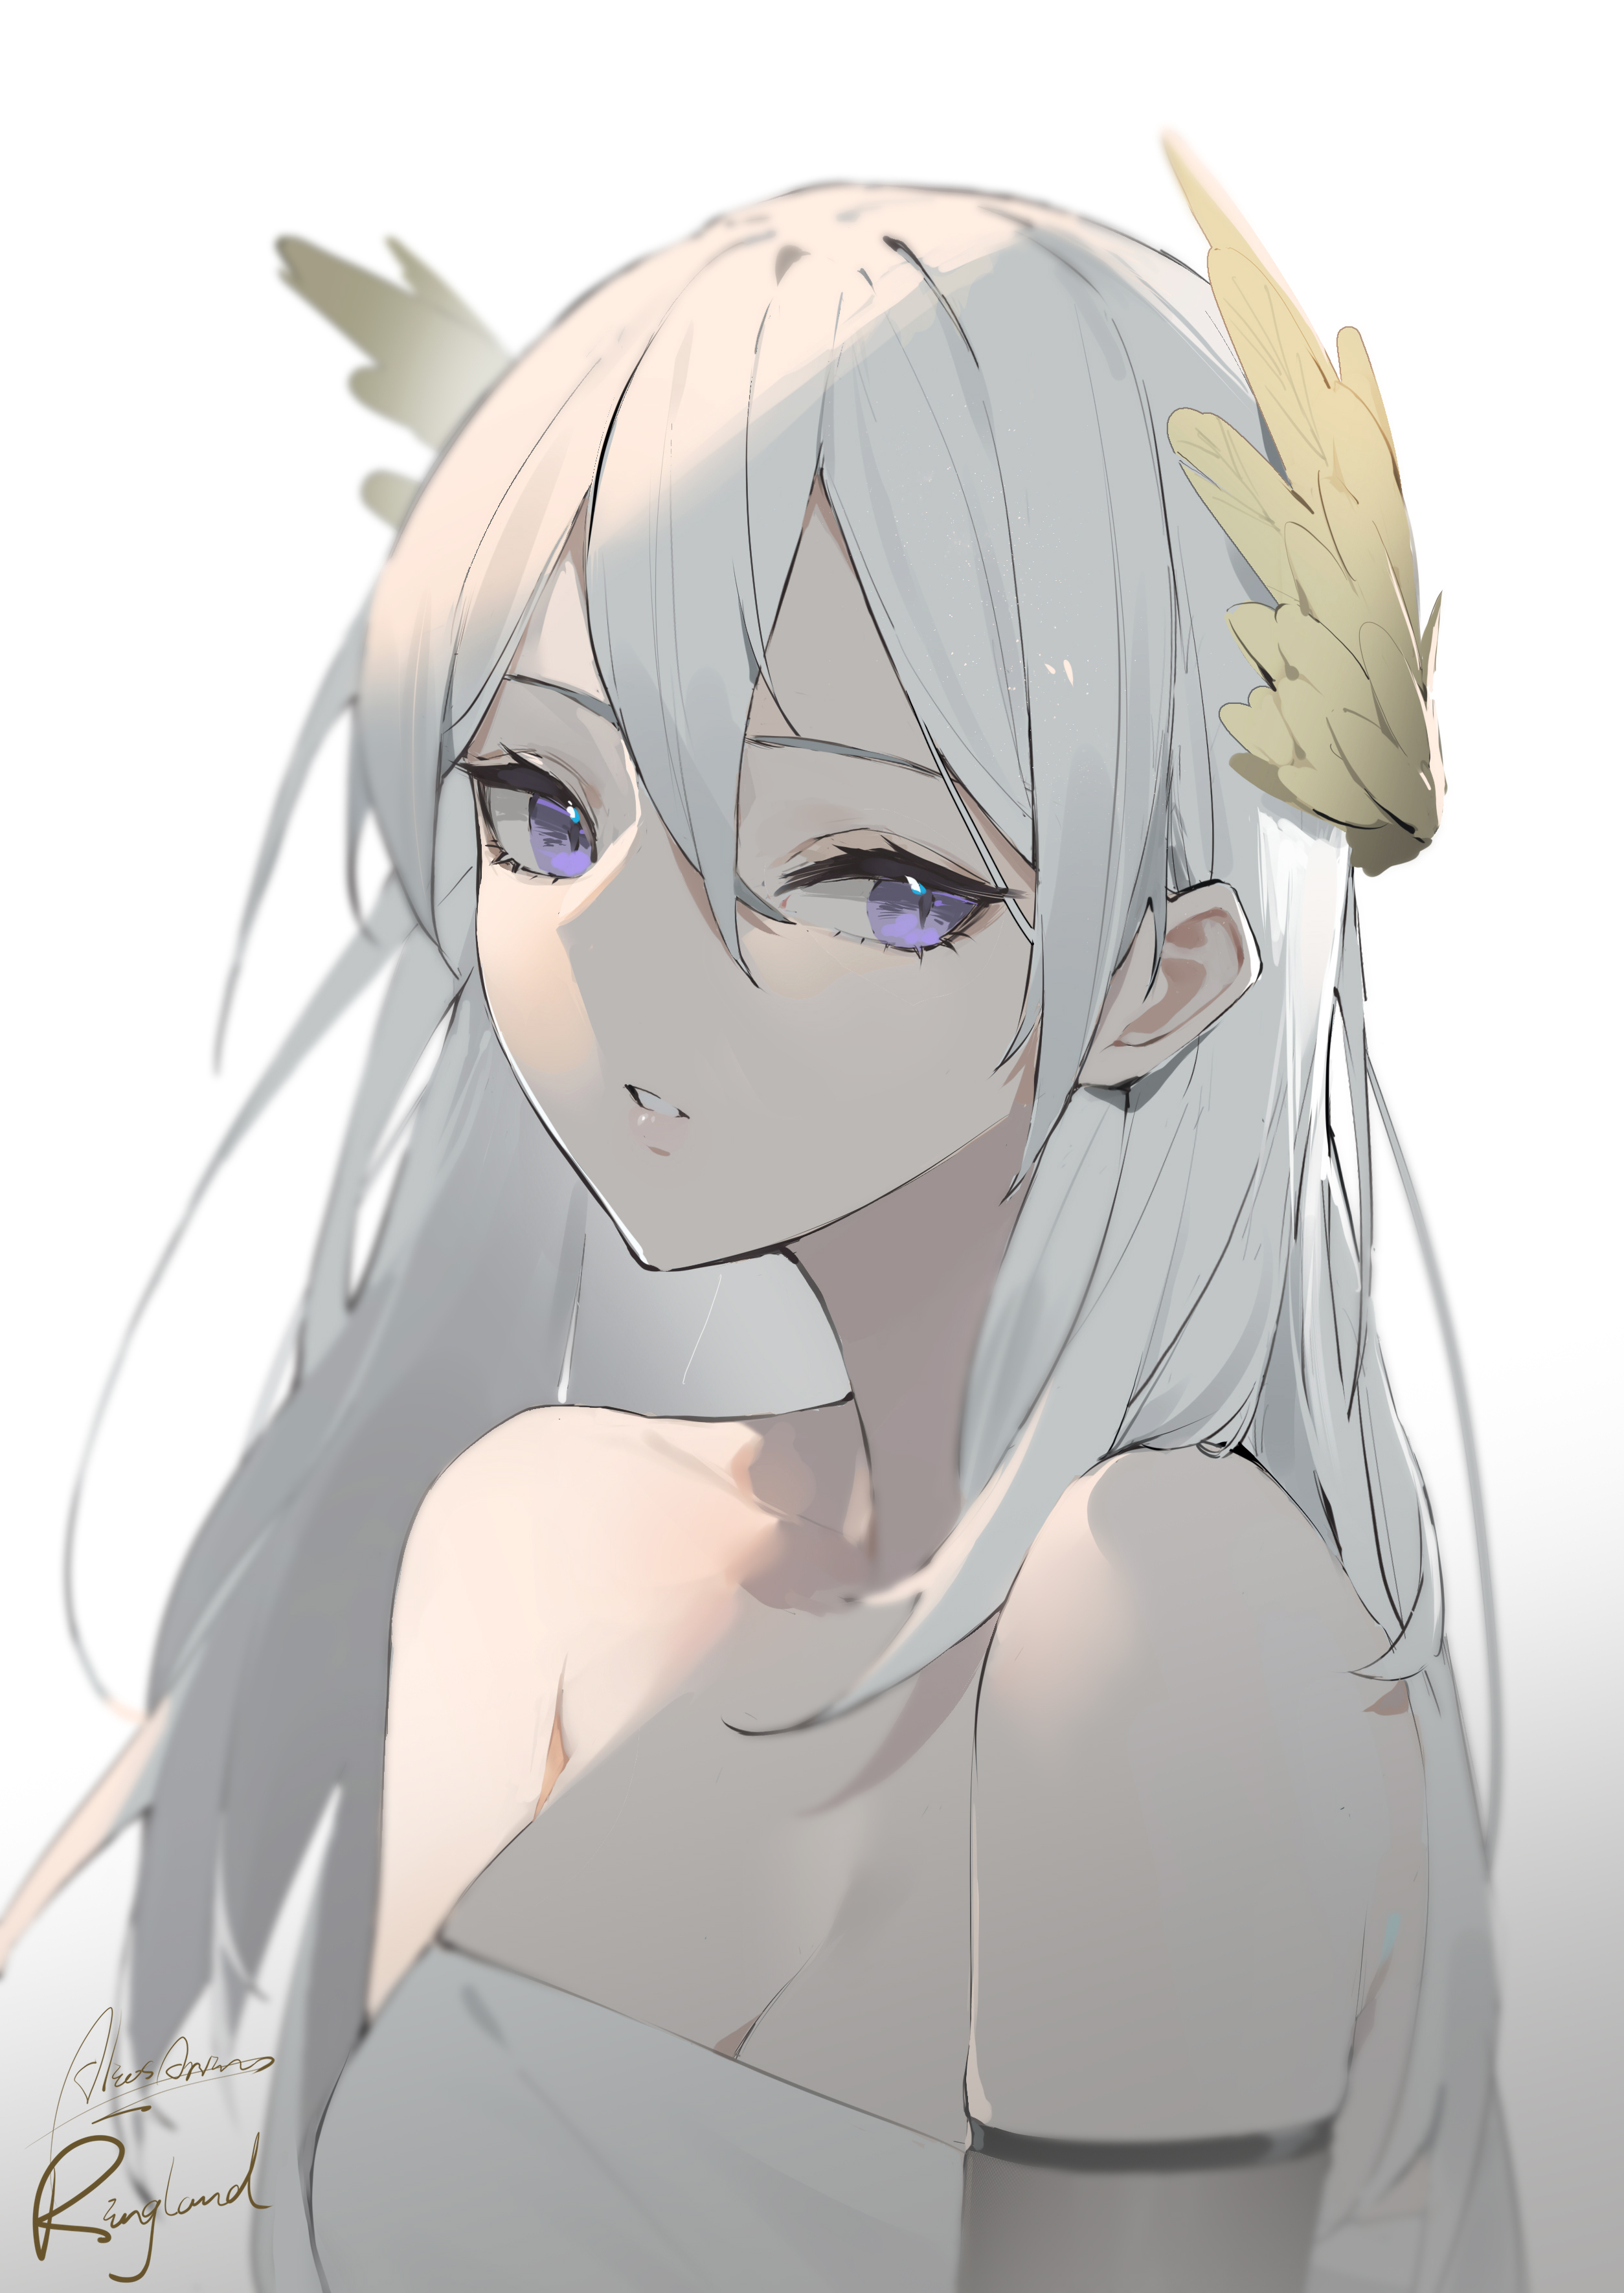 anime girl with gray hair and purple eyes